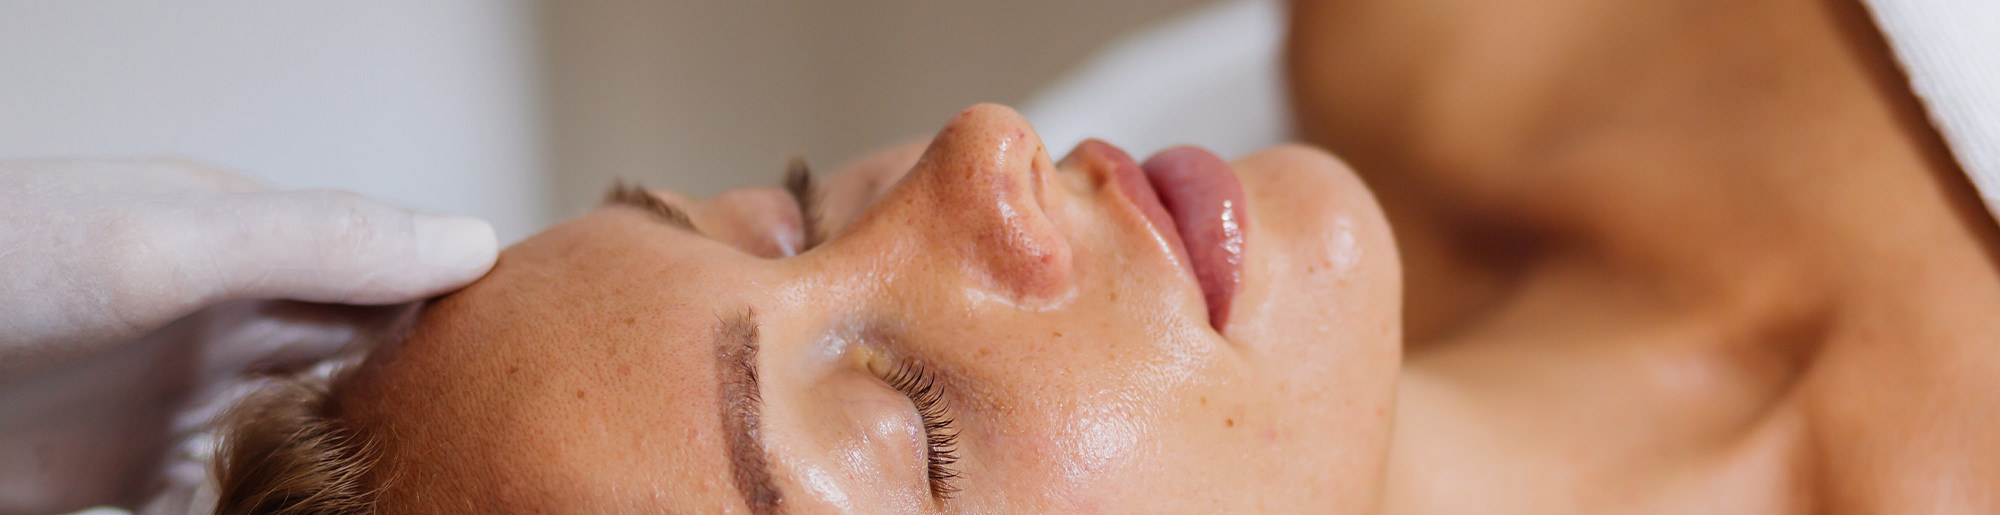 Woman lying down during a professional skin treatment